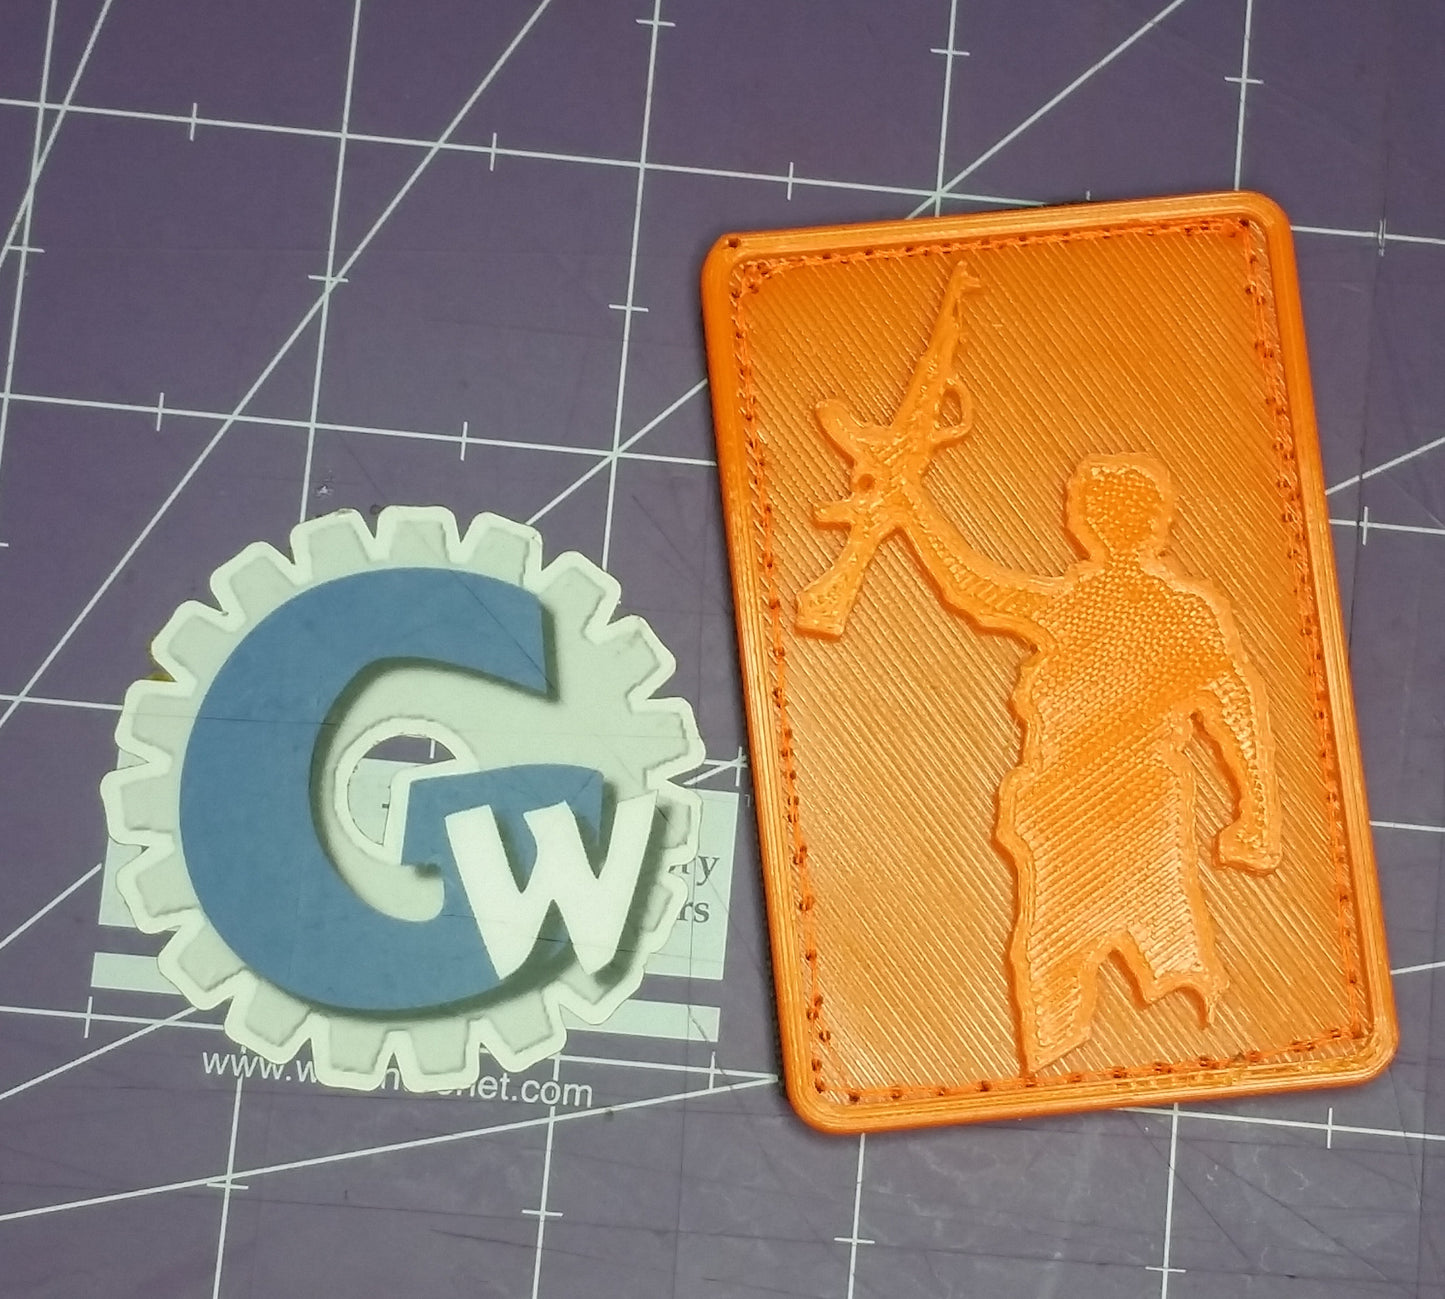 'Wolverine' - Ghost Patch